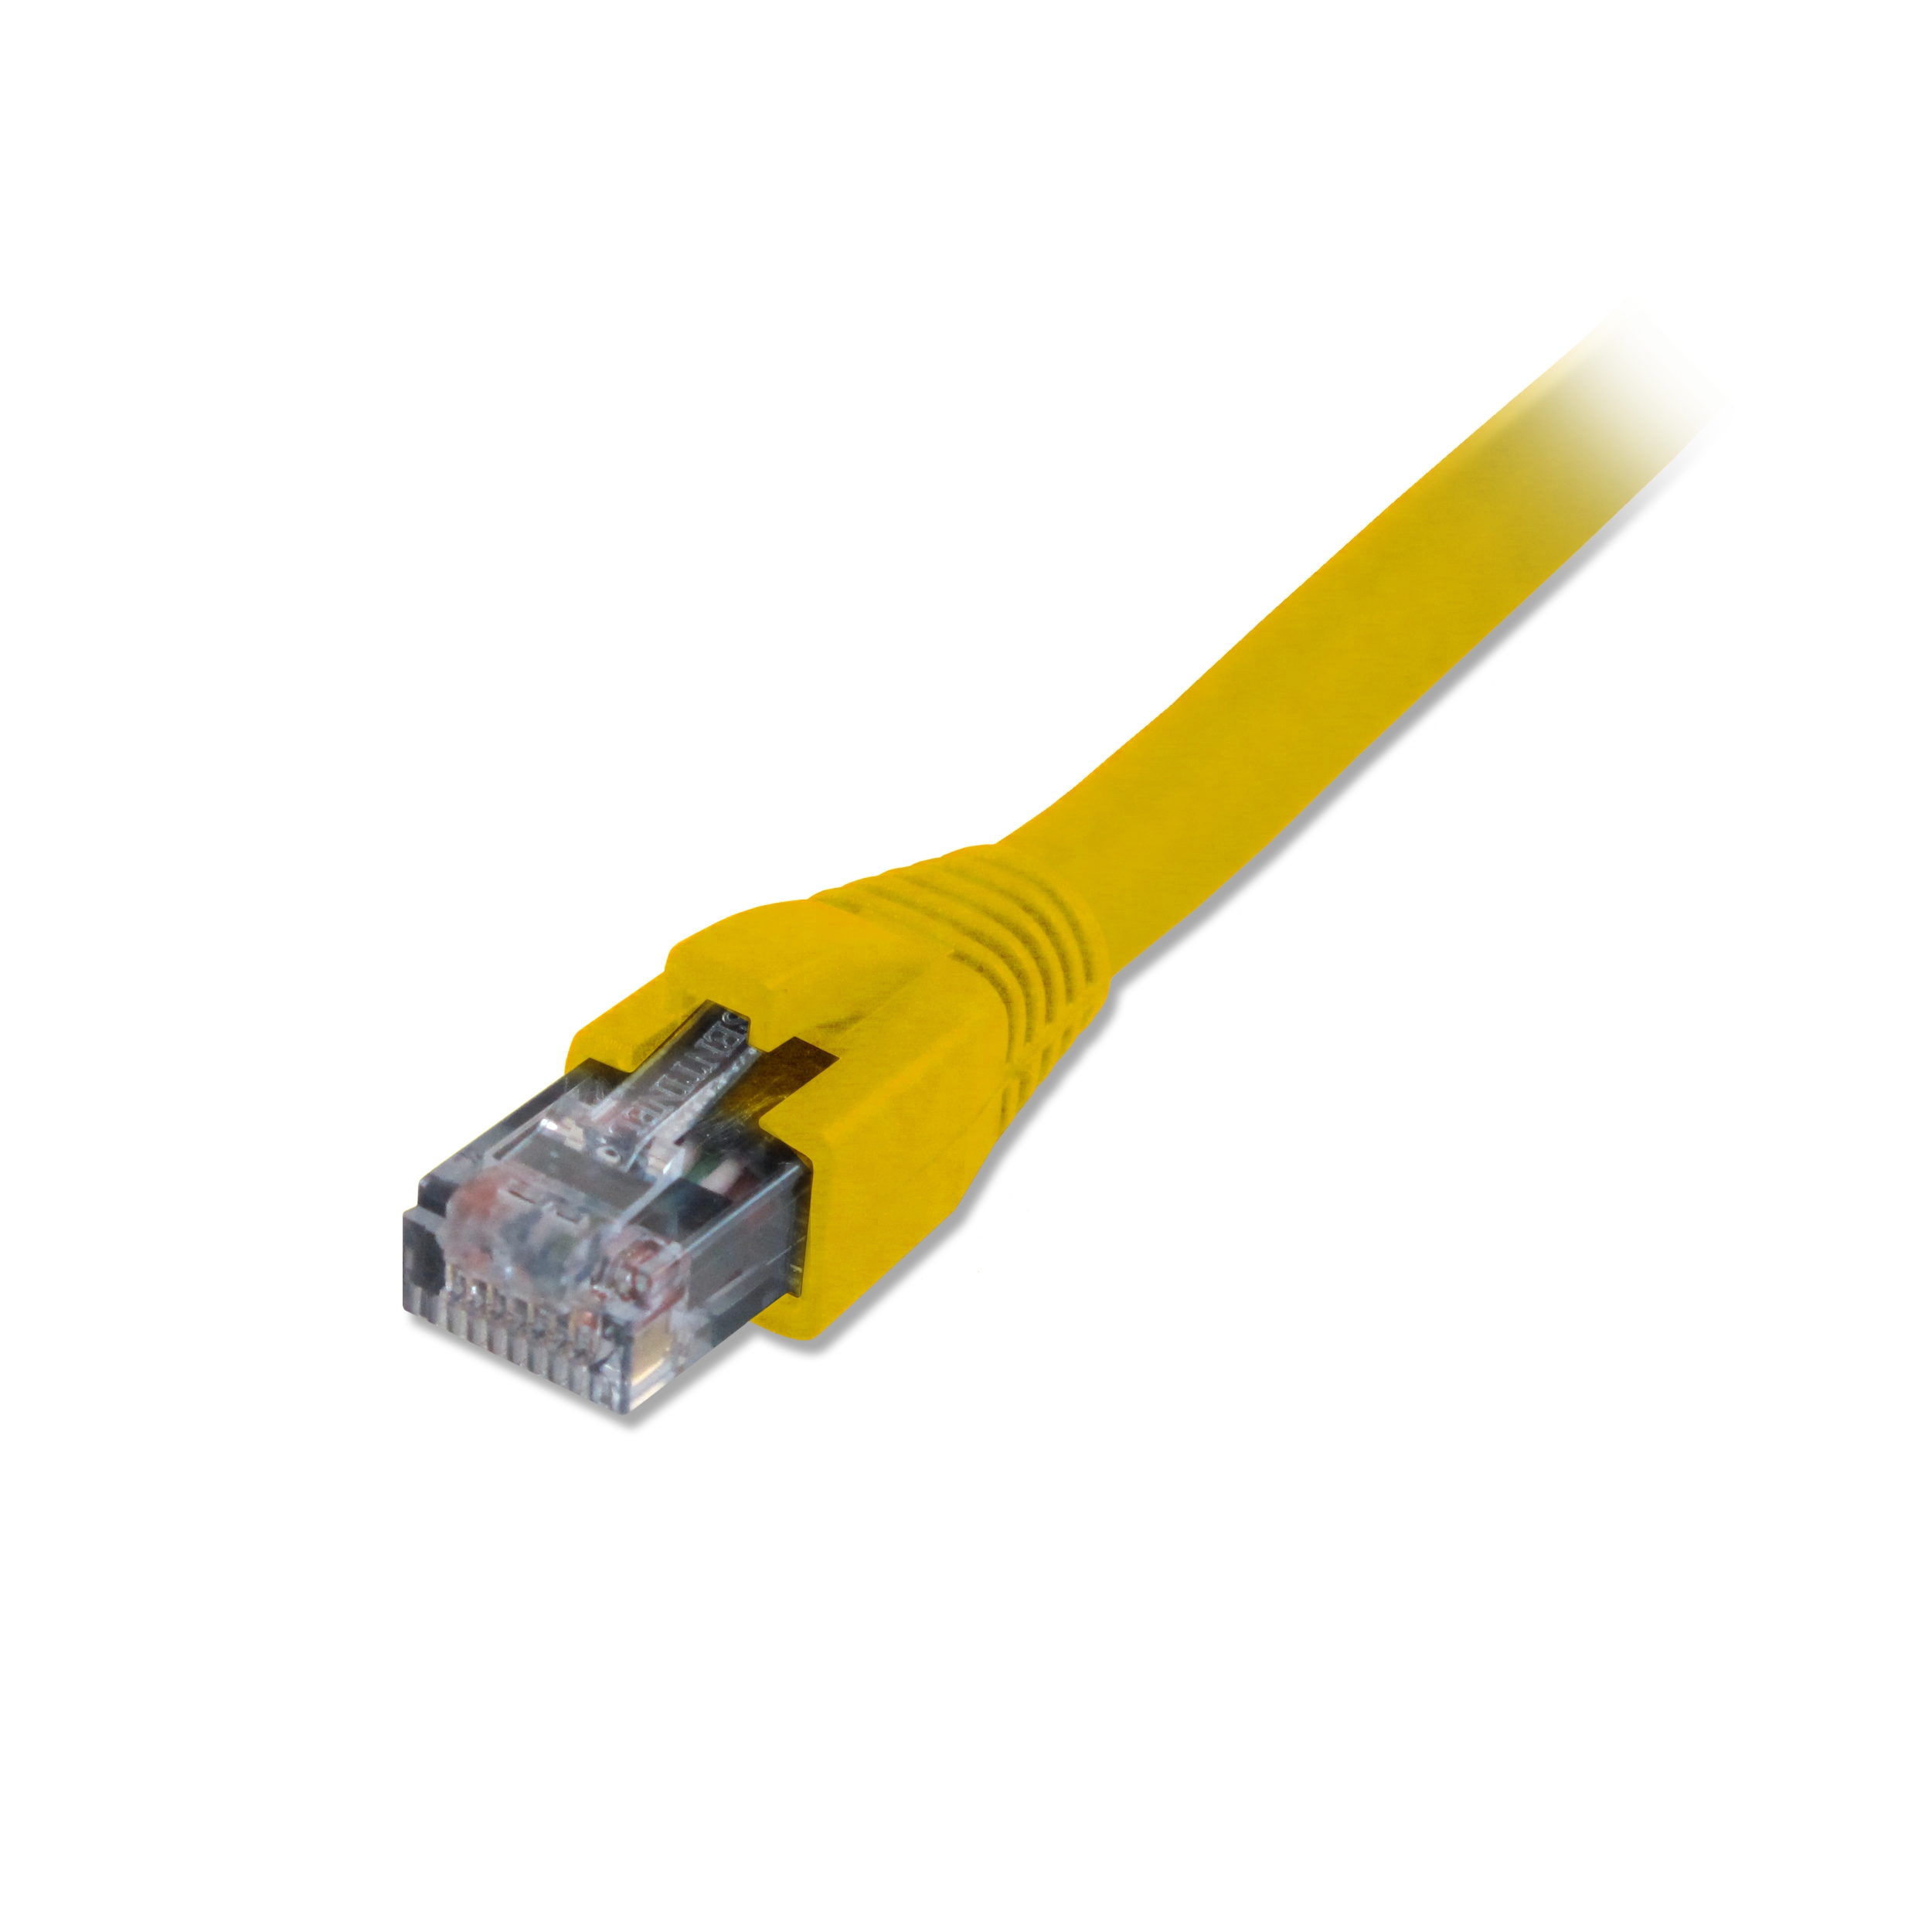 Comprehensive CAT5-350-1YLW Cat5e 350 Mhz Snagless Patch Cable 1ft Yellow